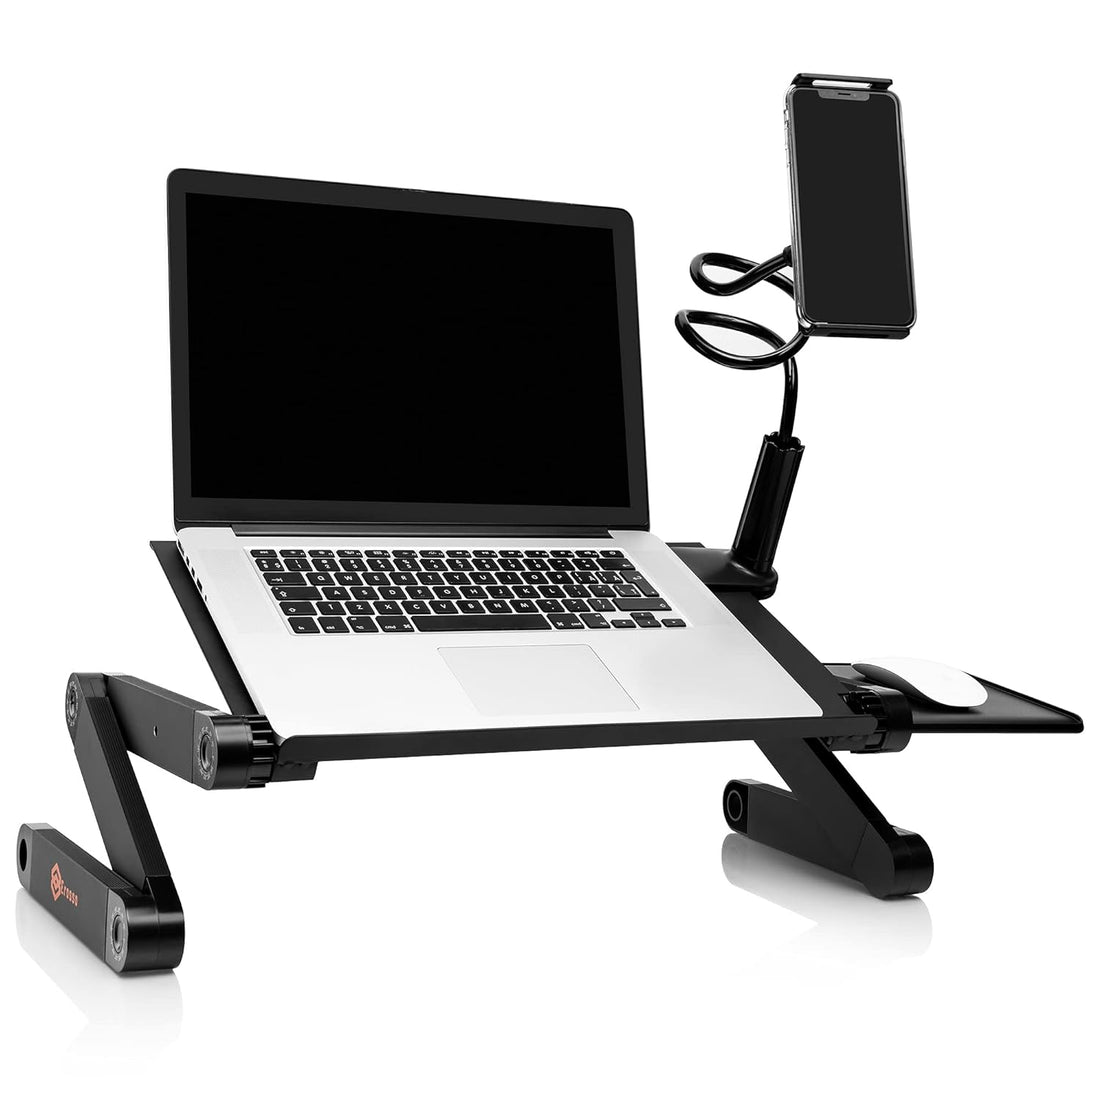 Laptop Stand for Bed- Portable Laptop Table -Folding Laptop Table - Laptop Stand Adjustable Height with Phone Holder and Mouse Pad Ergonomic Laptop Desk for Couch Computer Riser by Erosso